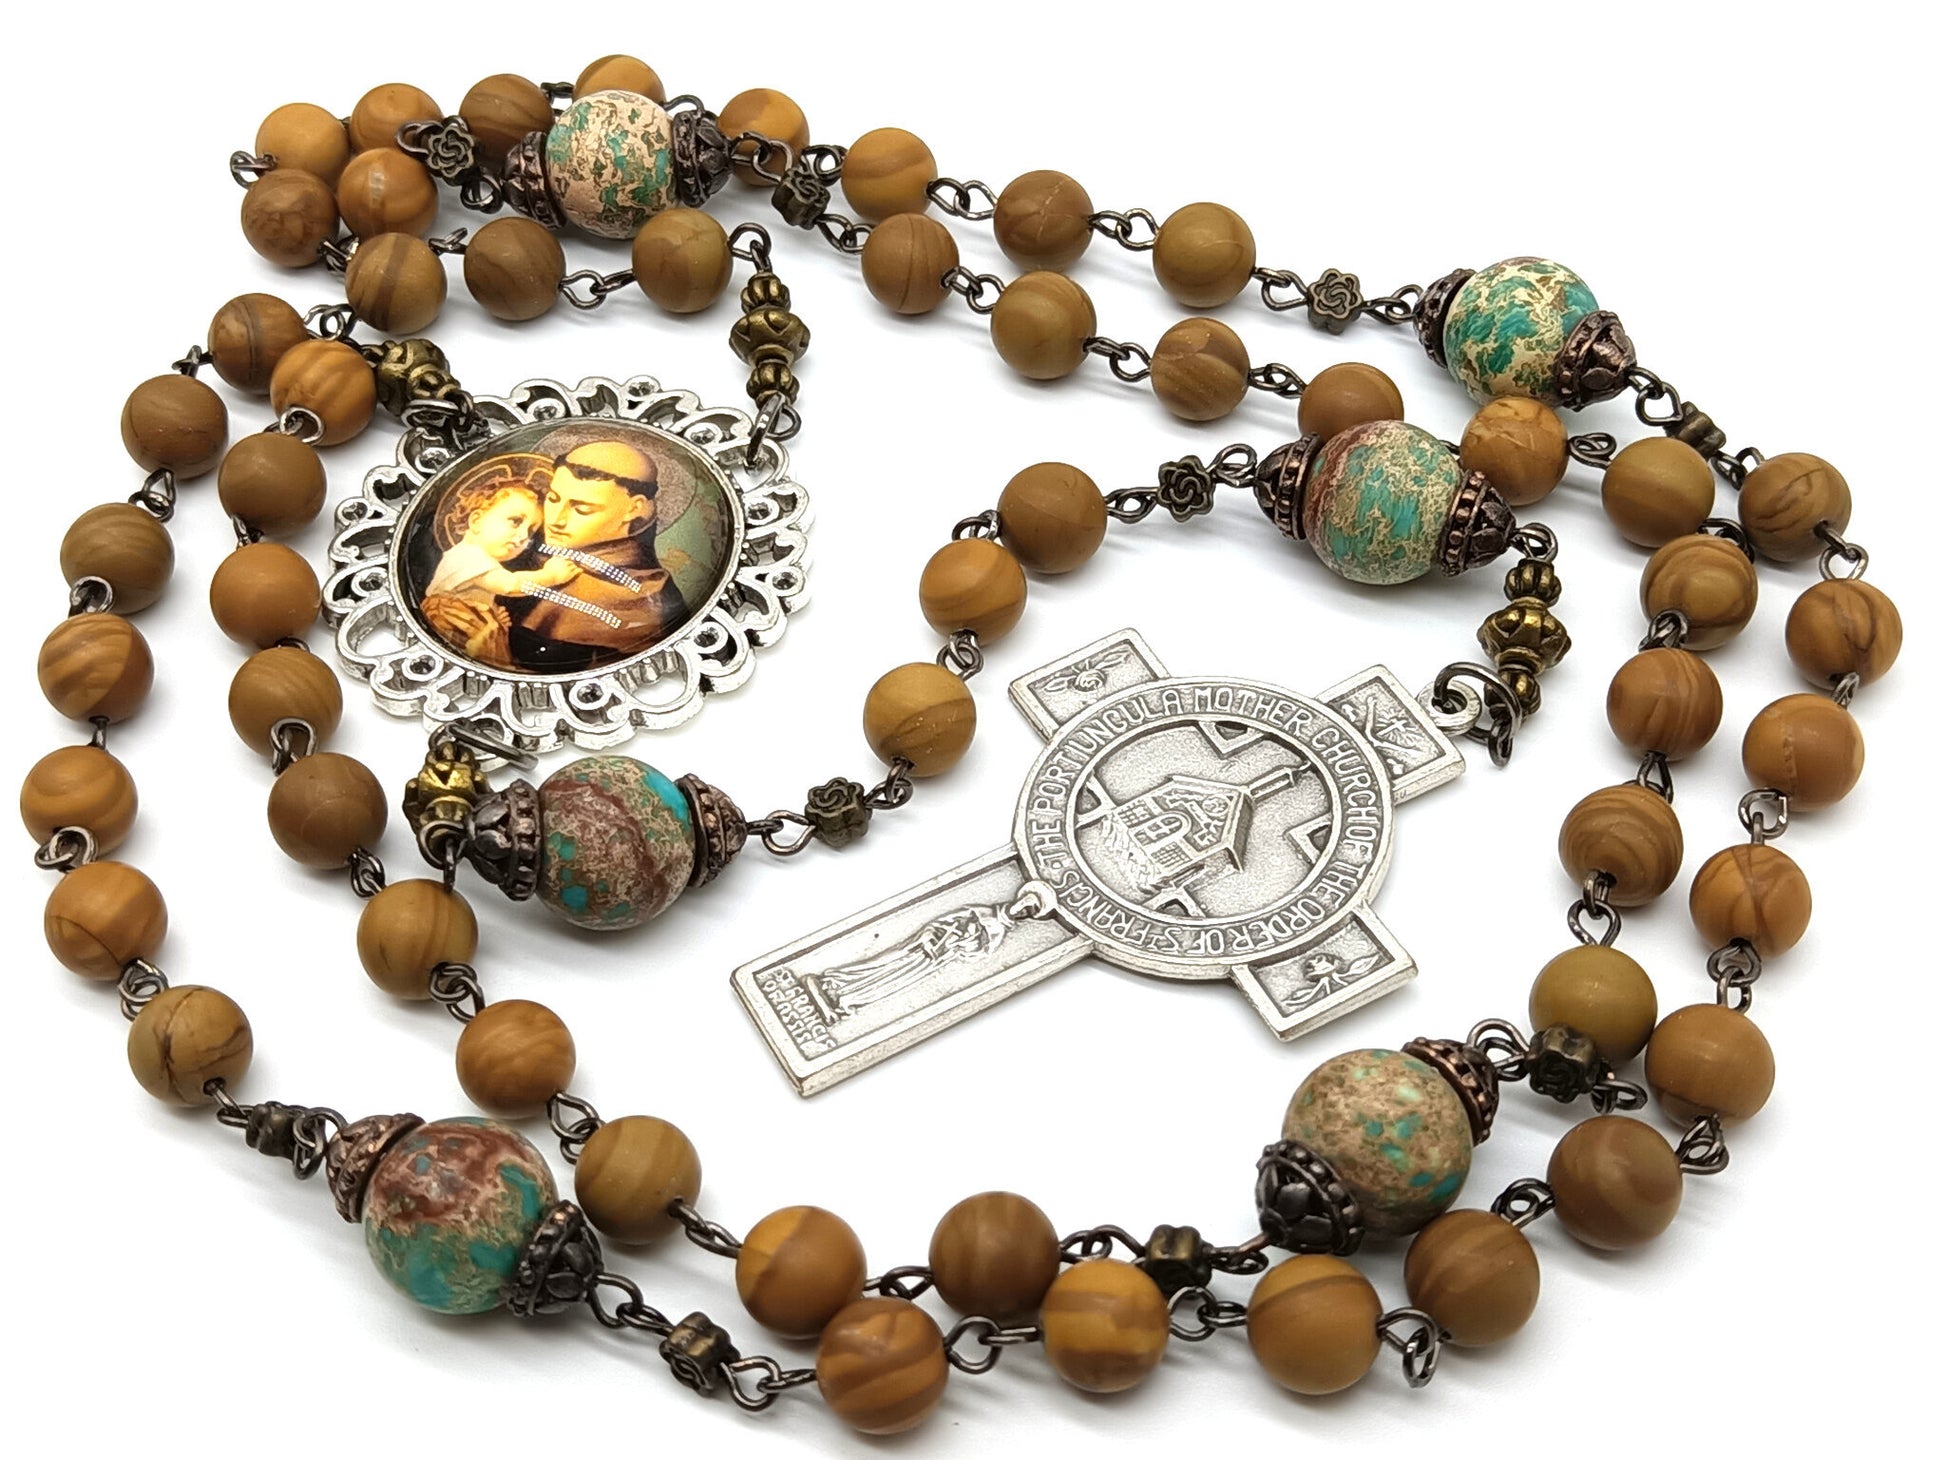 Saint Anthony of Padua gemstone unique rosary beads with Saint Francis blessing crucifix and silver Saint Anthony picture centre medal.